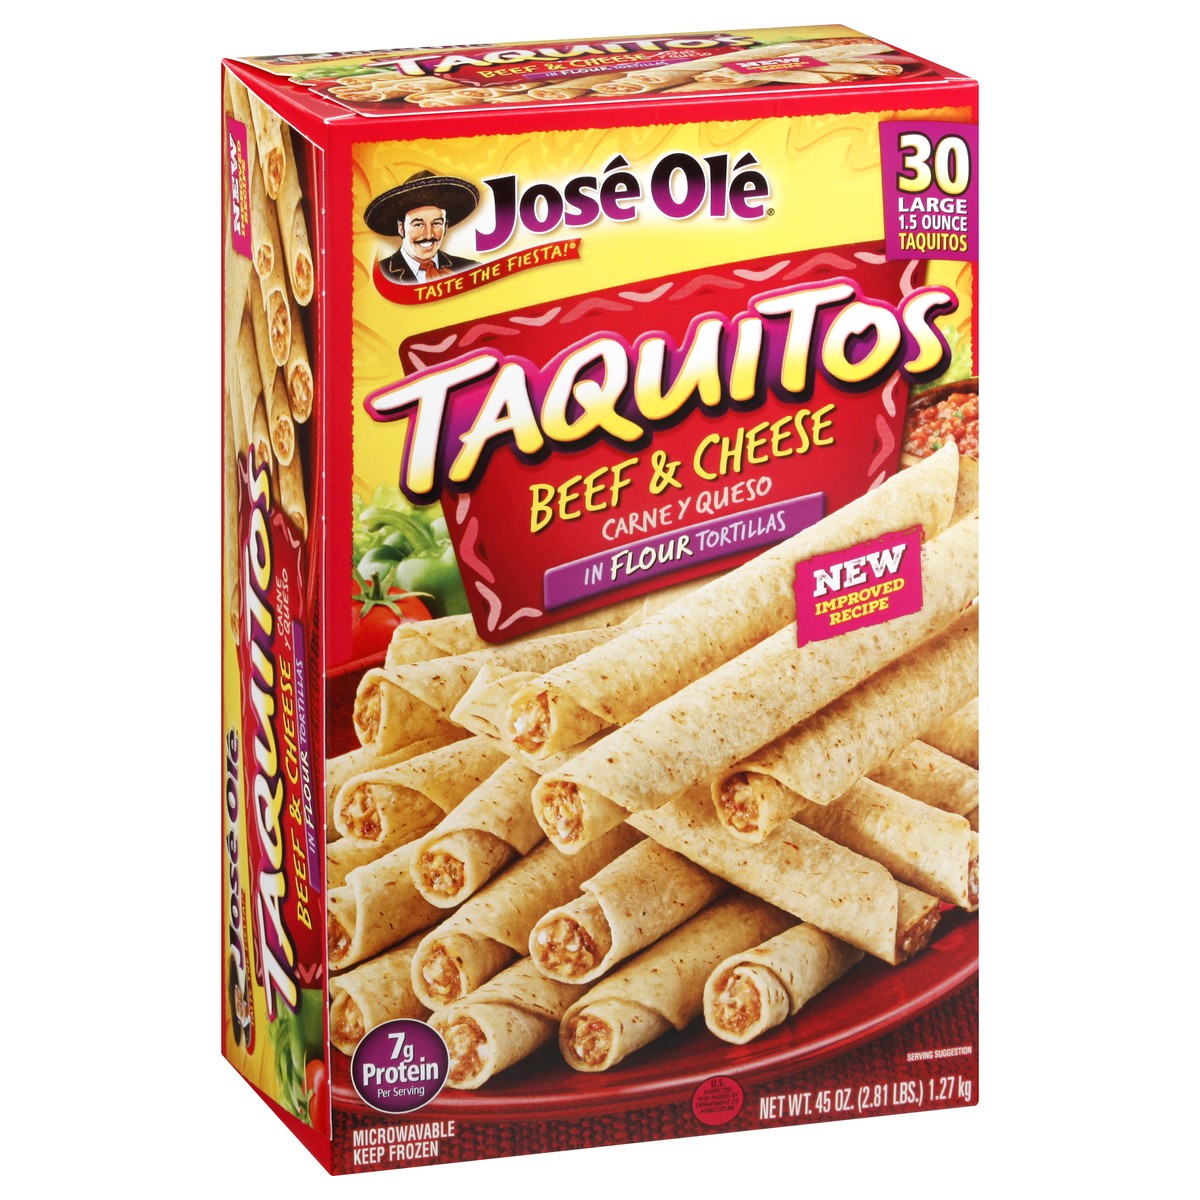 slide 2 of 9, José Olé Large Beef & Cheese Taquitos 30 ea, 30 ct